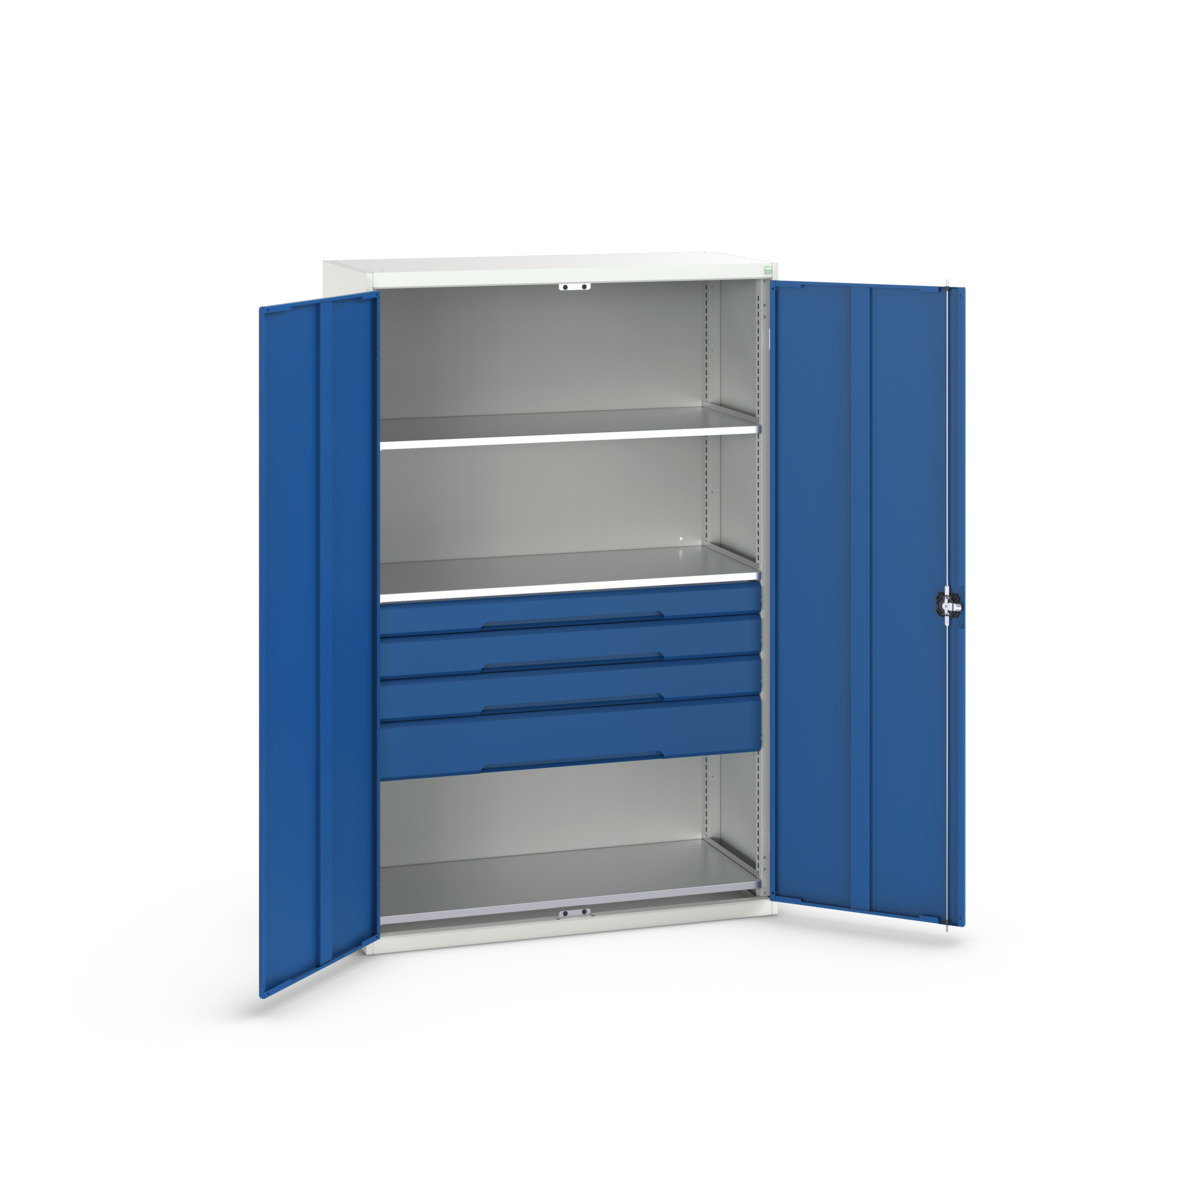 16926656.11 - verso kitted cupboard